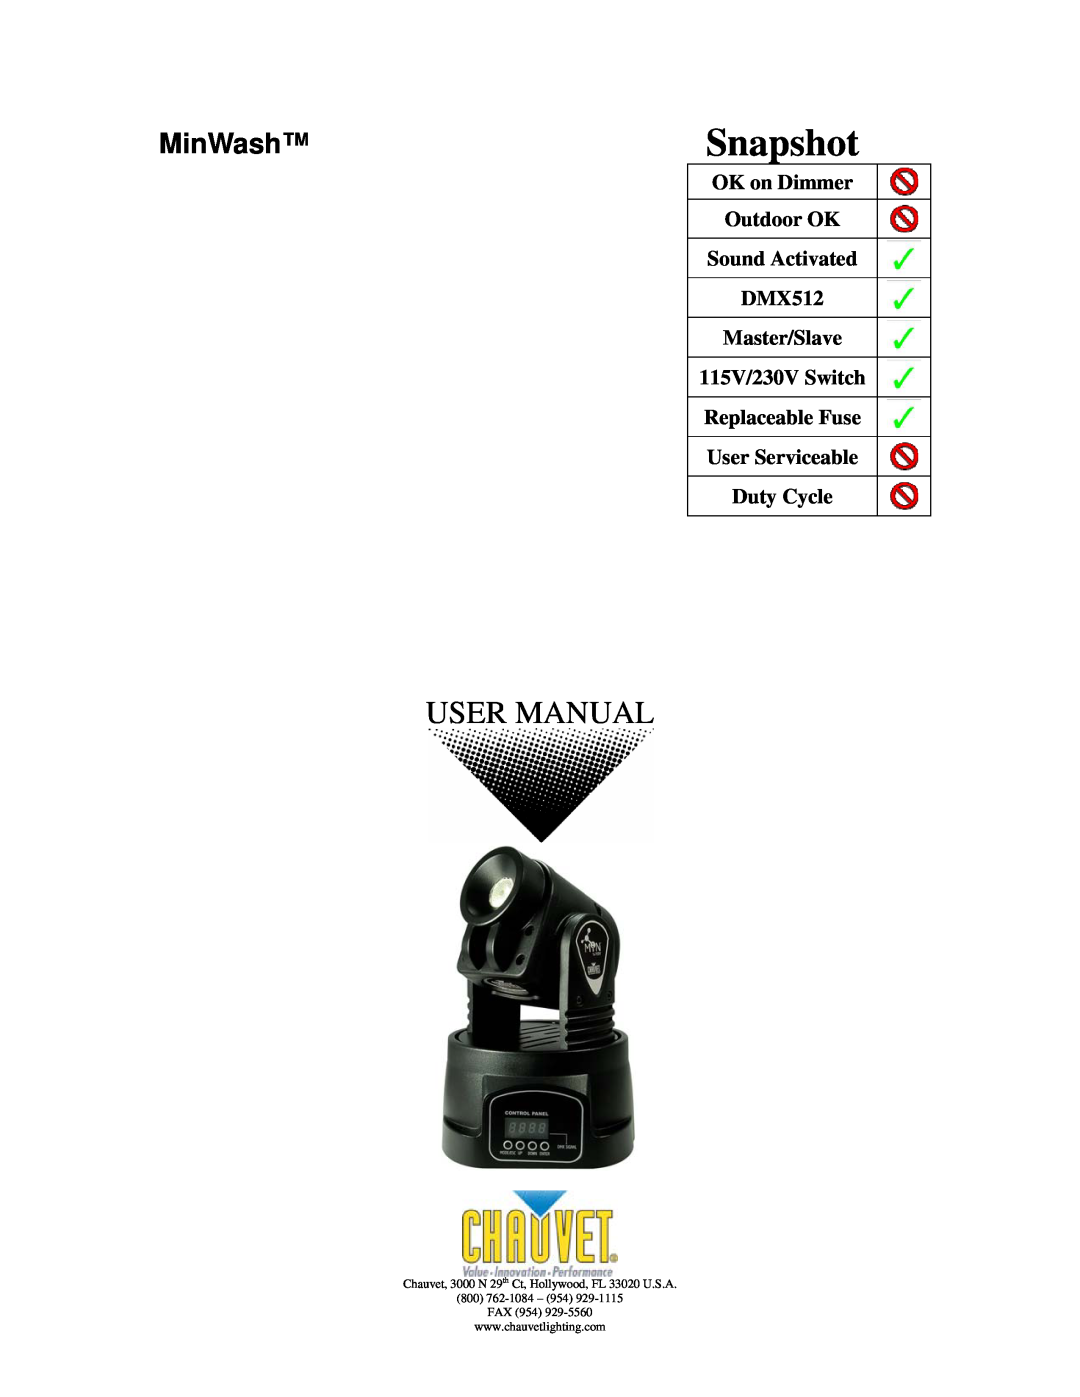 Chauvet user manual Use on Dimmer Outdoor OK Sound Activated DMX512, Master/Slave Autoswitching Power Supply, Snapshot 